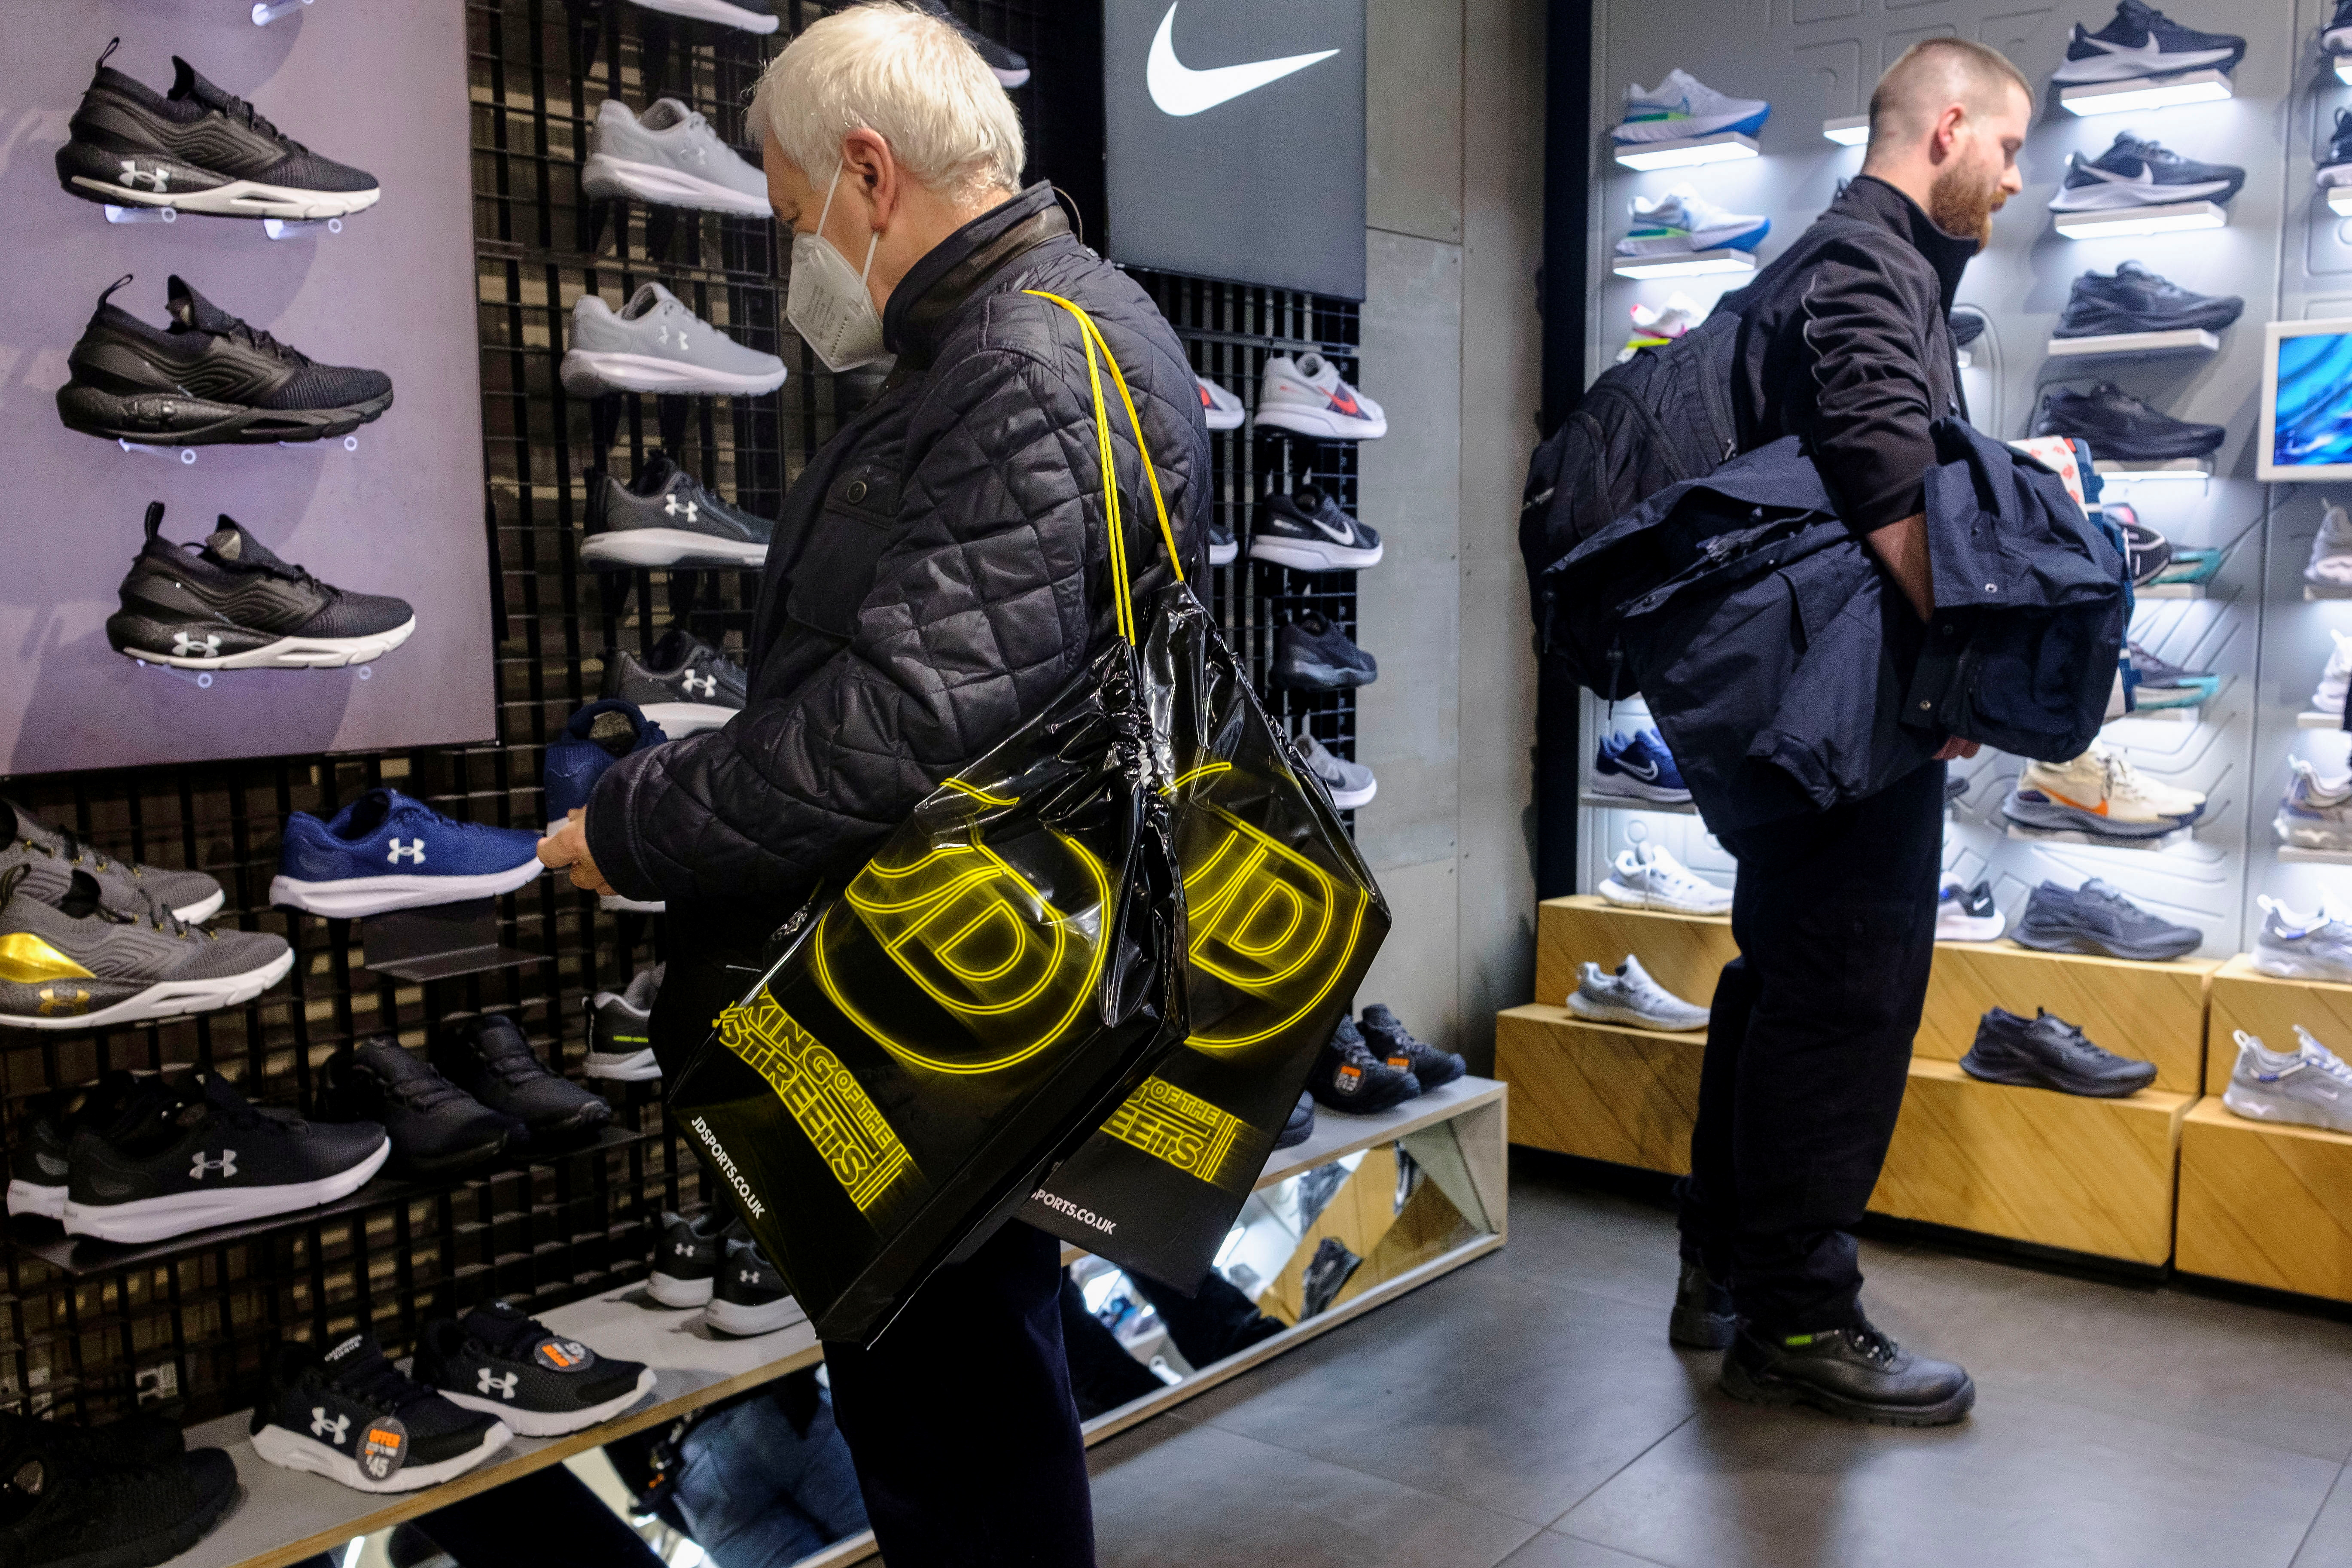 A shopper carrying JD Sports bags looks at footwear at a JD Sports store in London